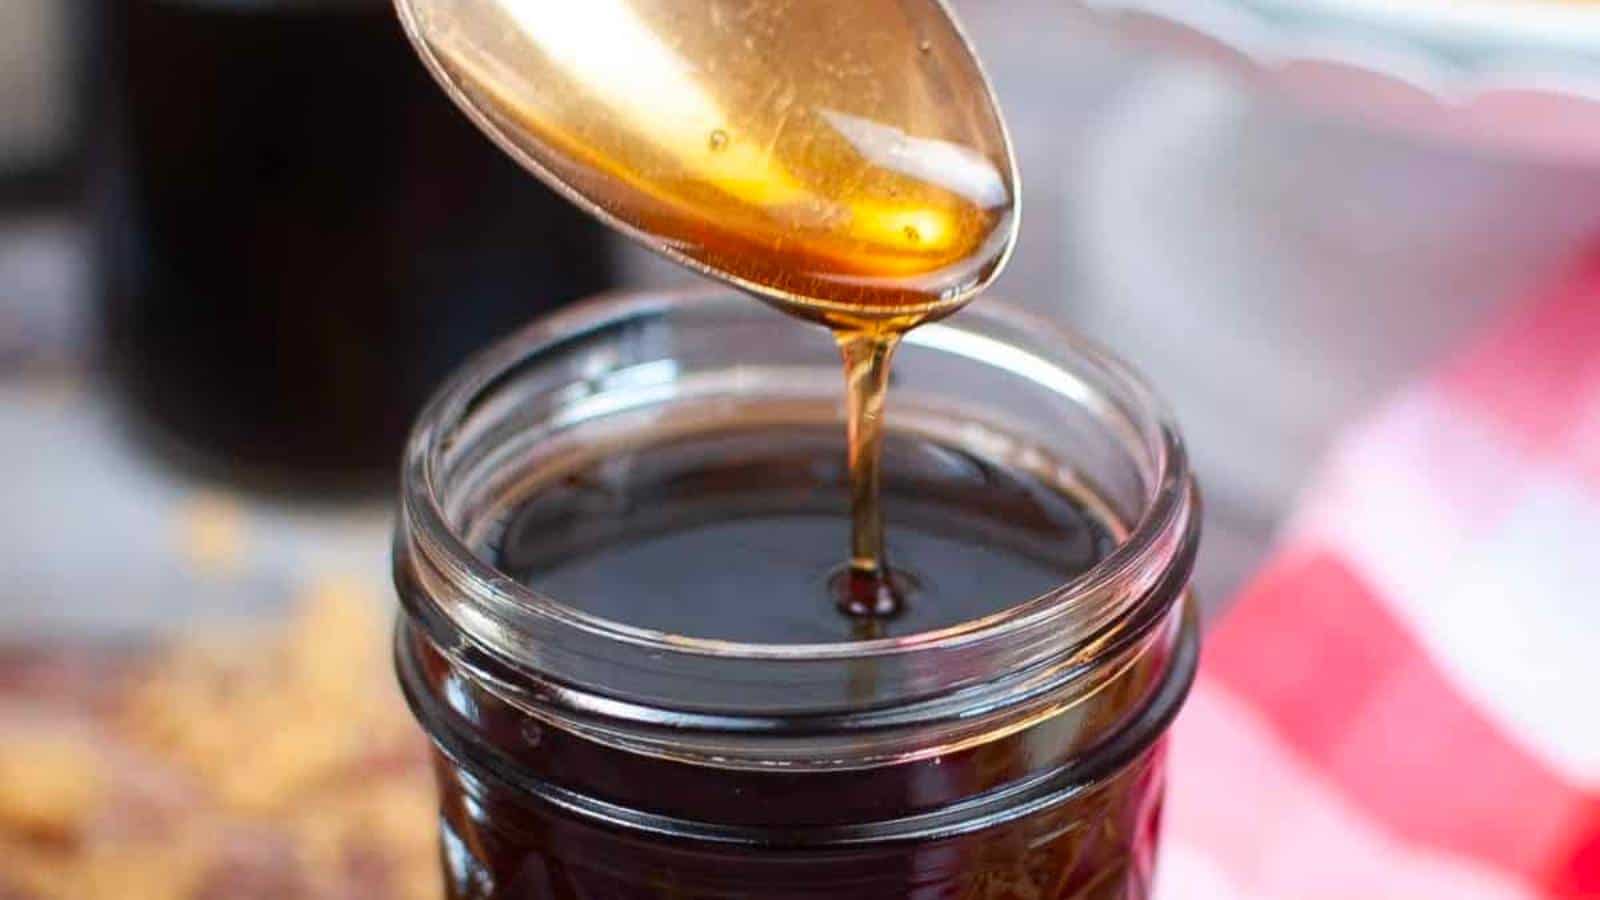 Pancake syrup dripping from spoon to jar.